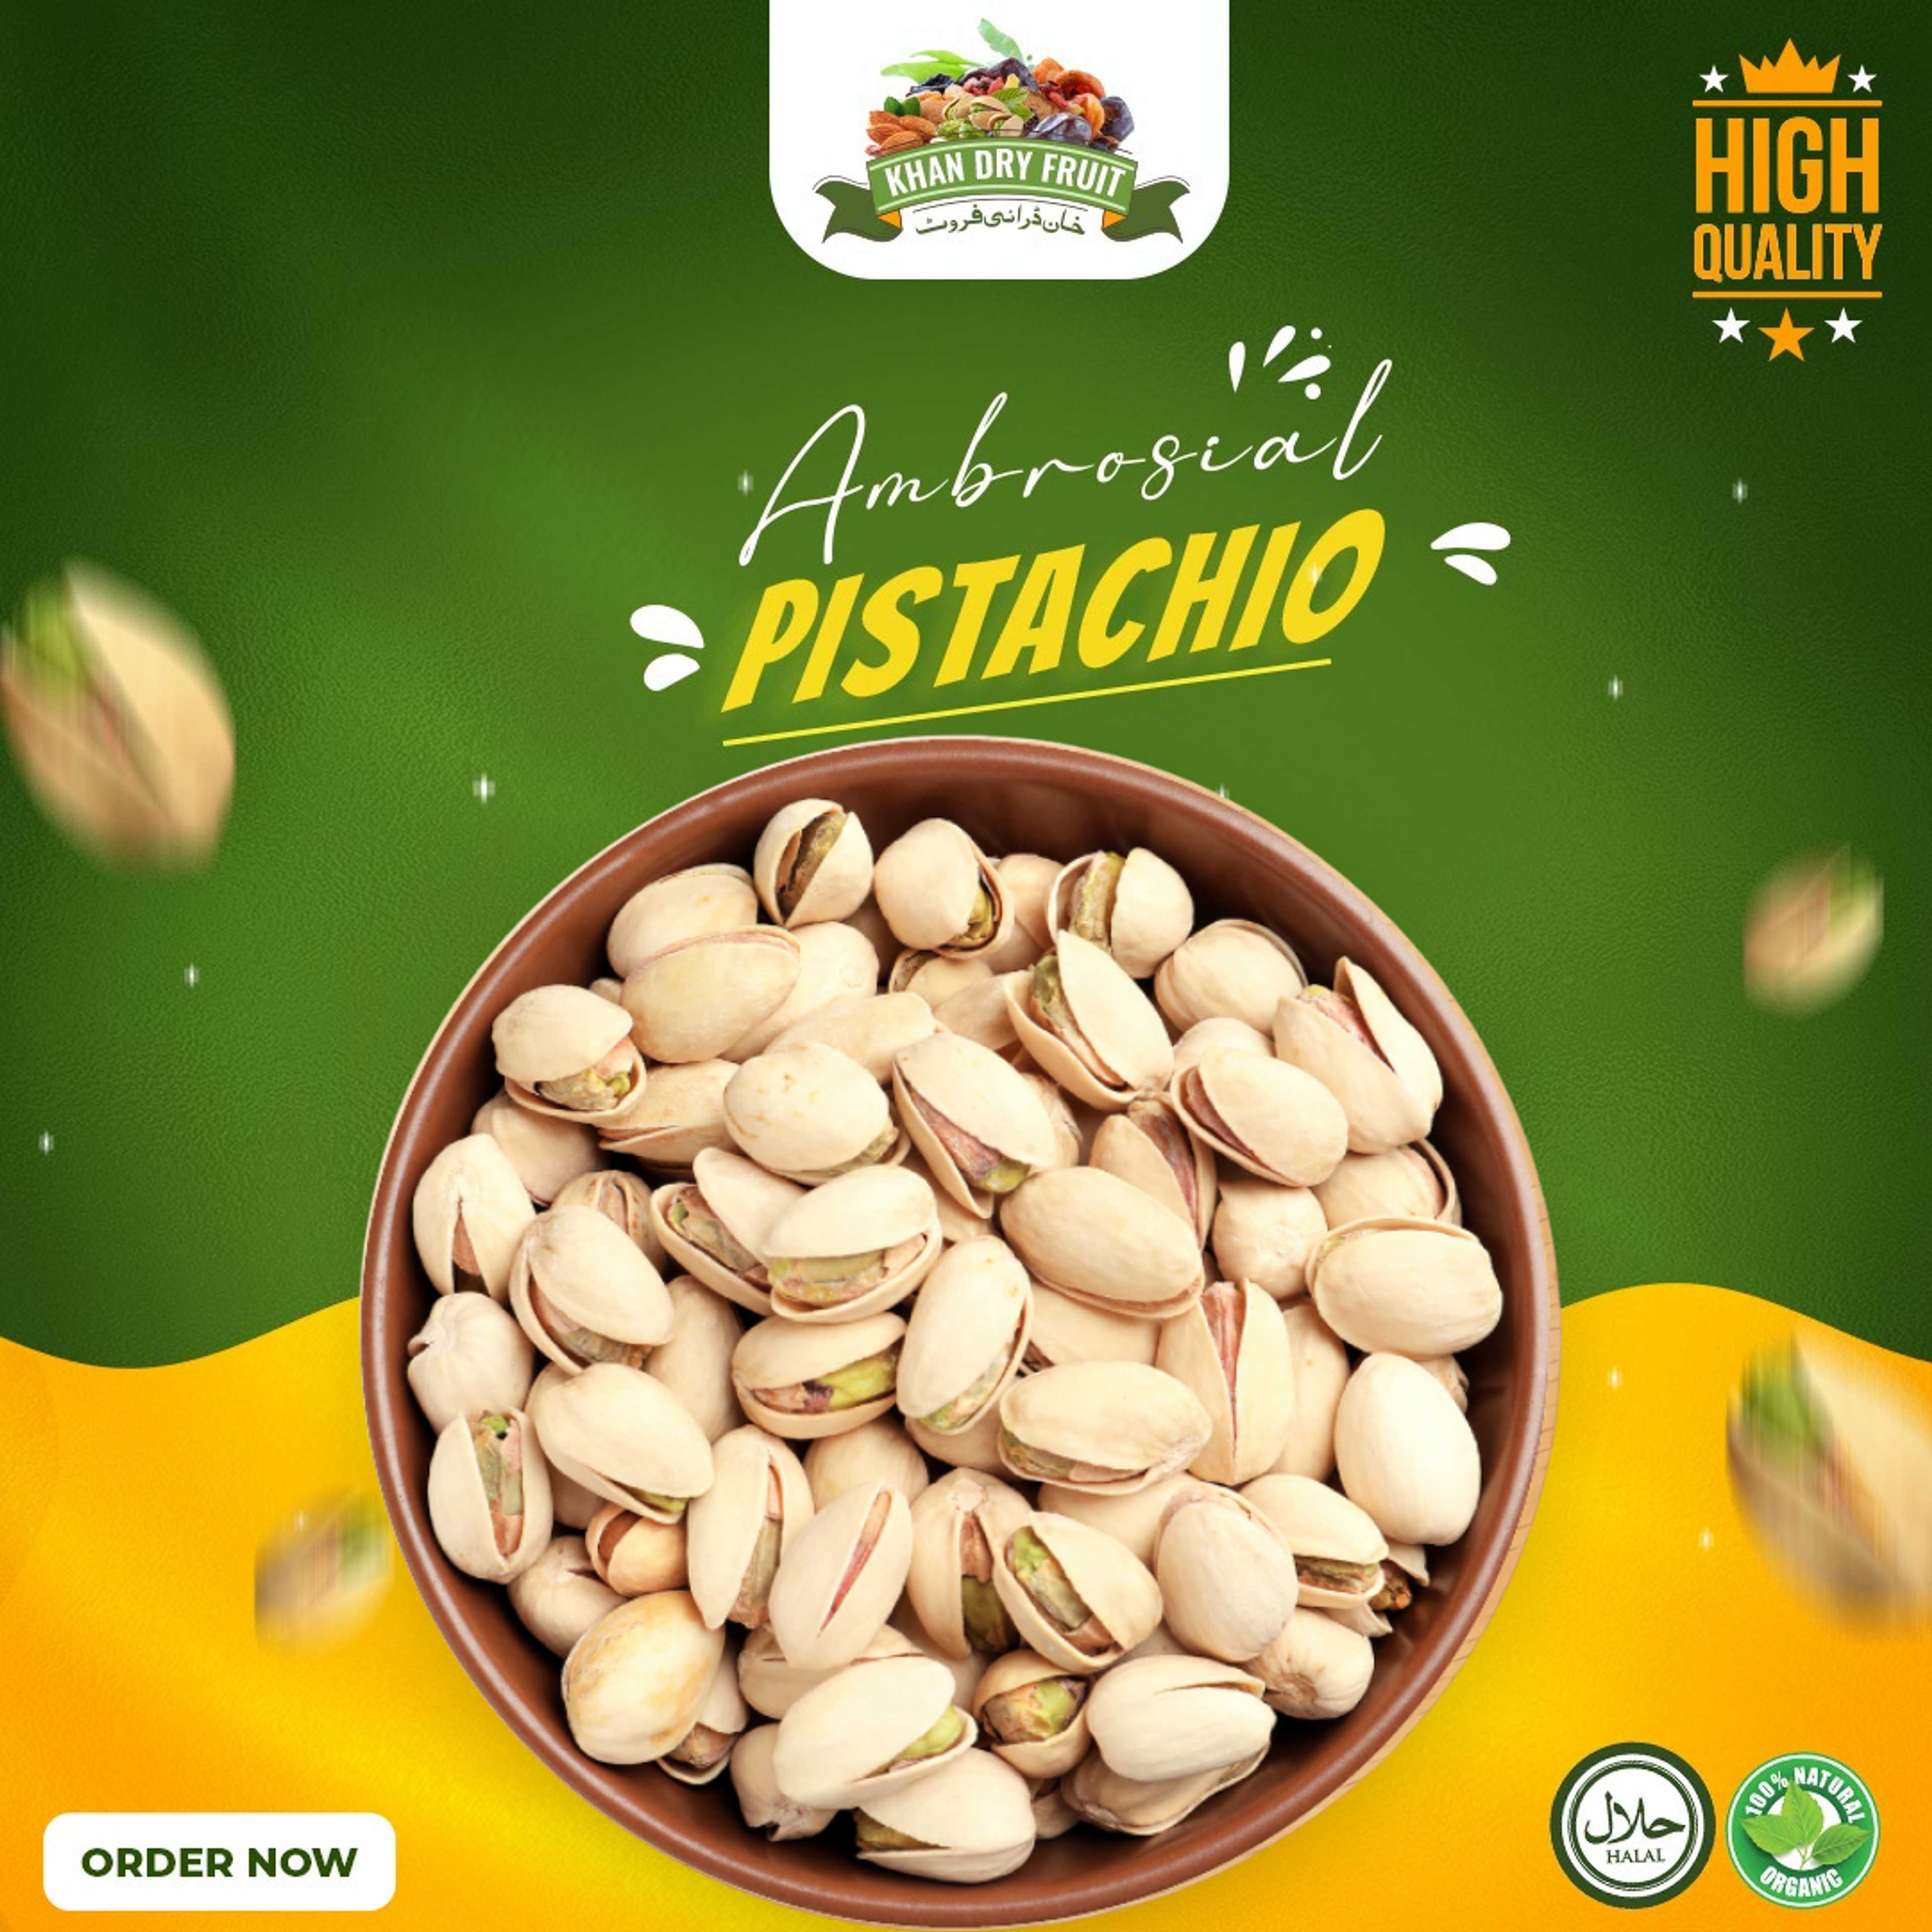 Pistachio Salted - High Quality - Fresh Stock - 1000grams Pack - #DryFruit #Freshstock #highquality #bestofferedprice #pistasalted #pistawithshells #pistachiosalted